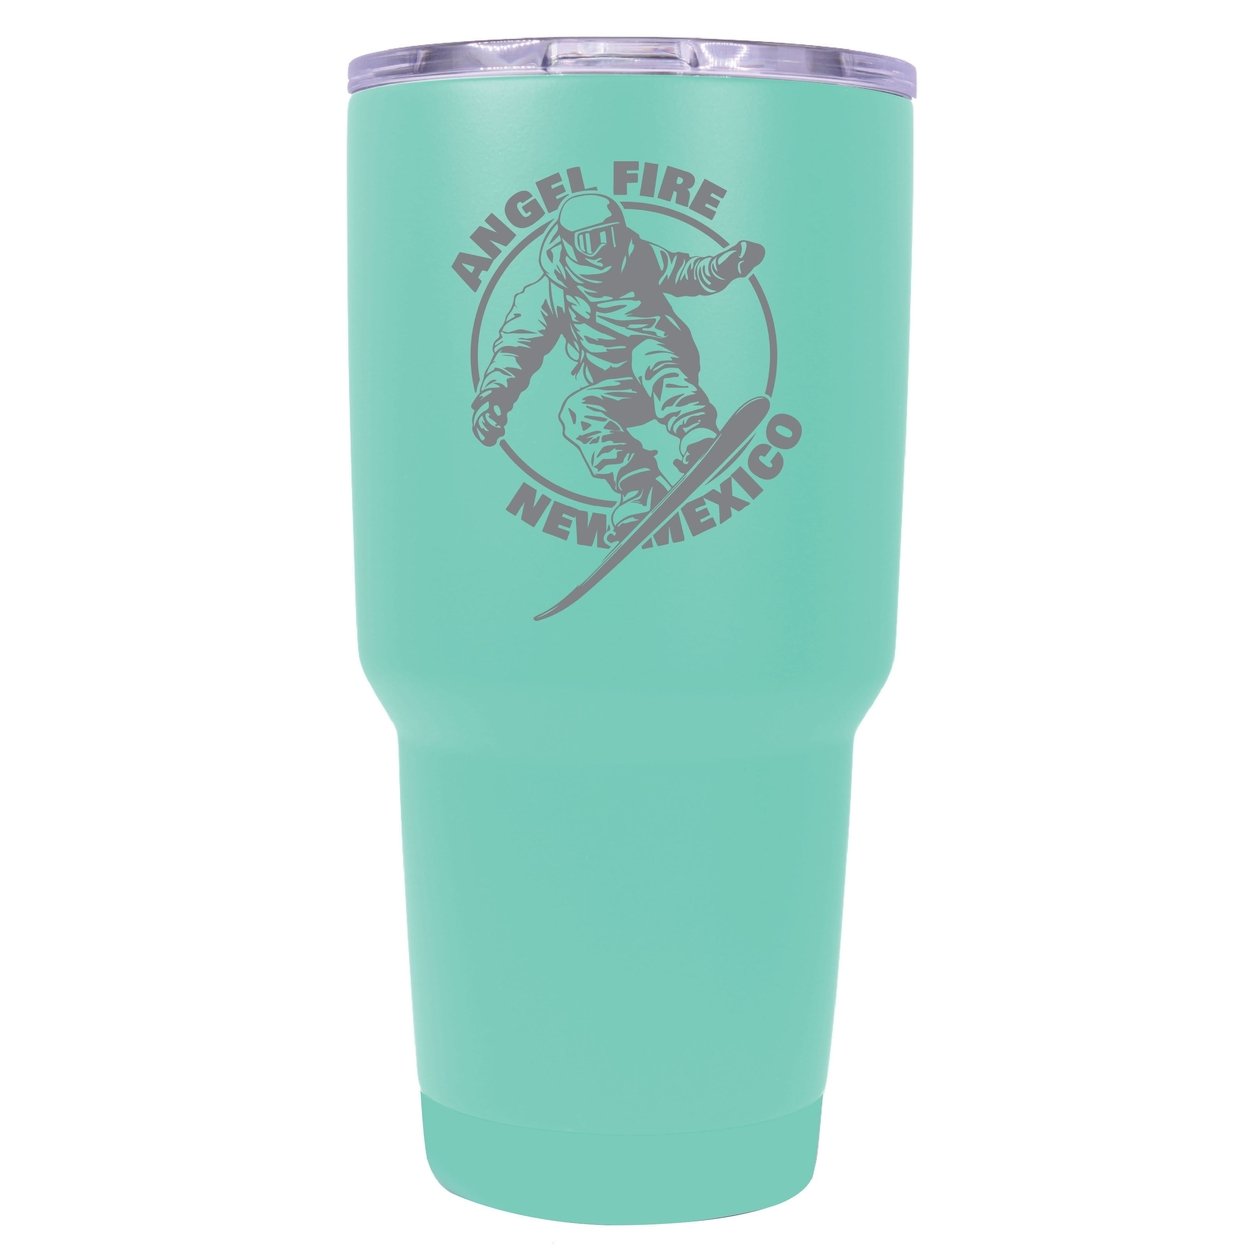 Angel Fire New Mexico Souvenir 24 Oz Engraved Insulated Stainless Steel Tumbler - White,,2-Pack